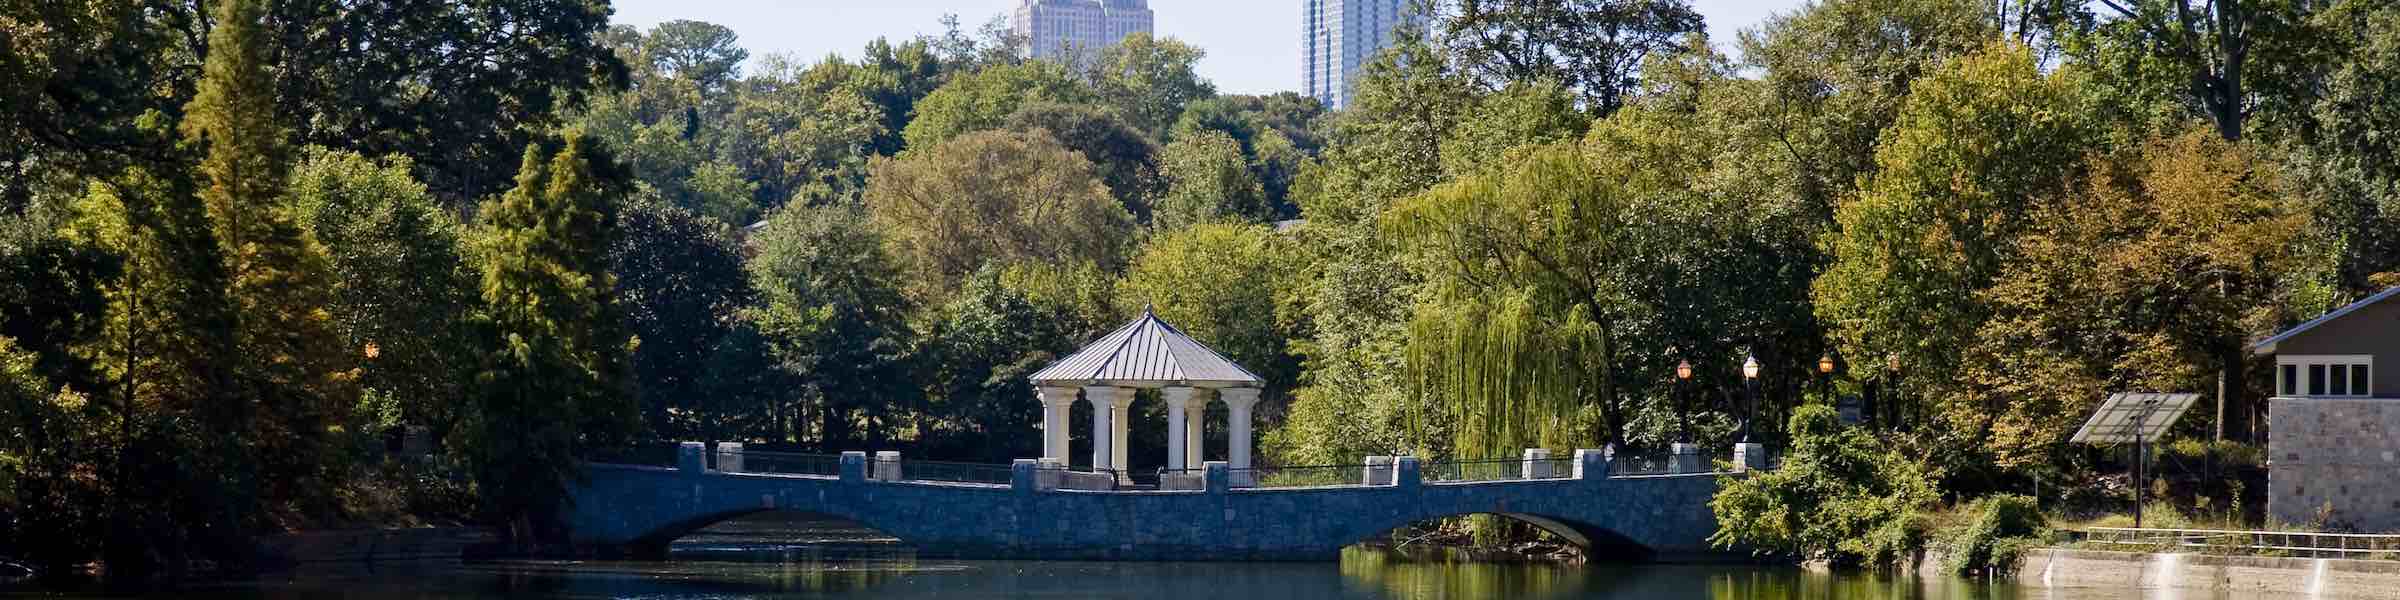 View of the lake in Piedmont Park, with skyscrapers in the background.